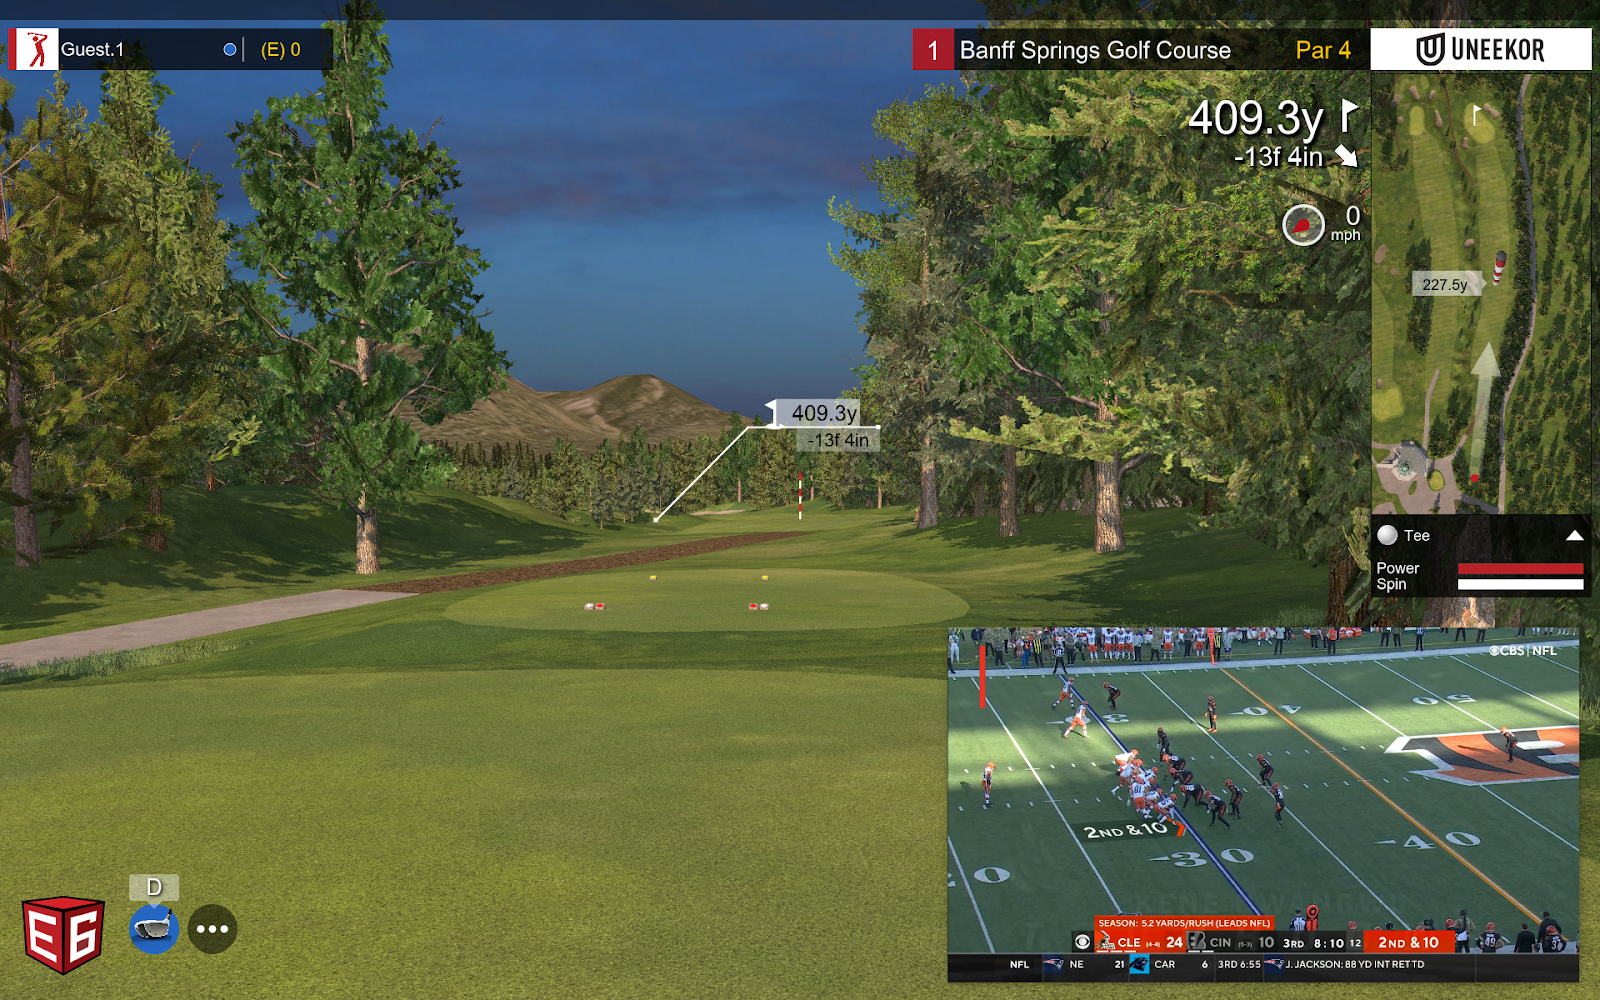 Screenshot of picture in picture with golf simulator software